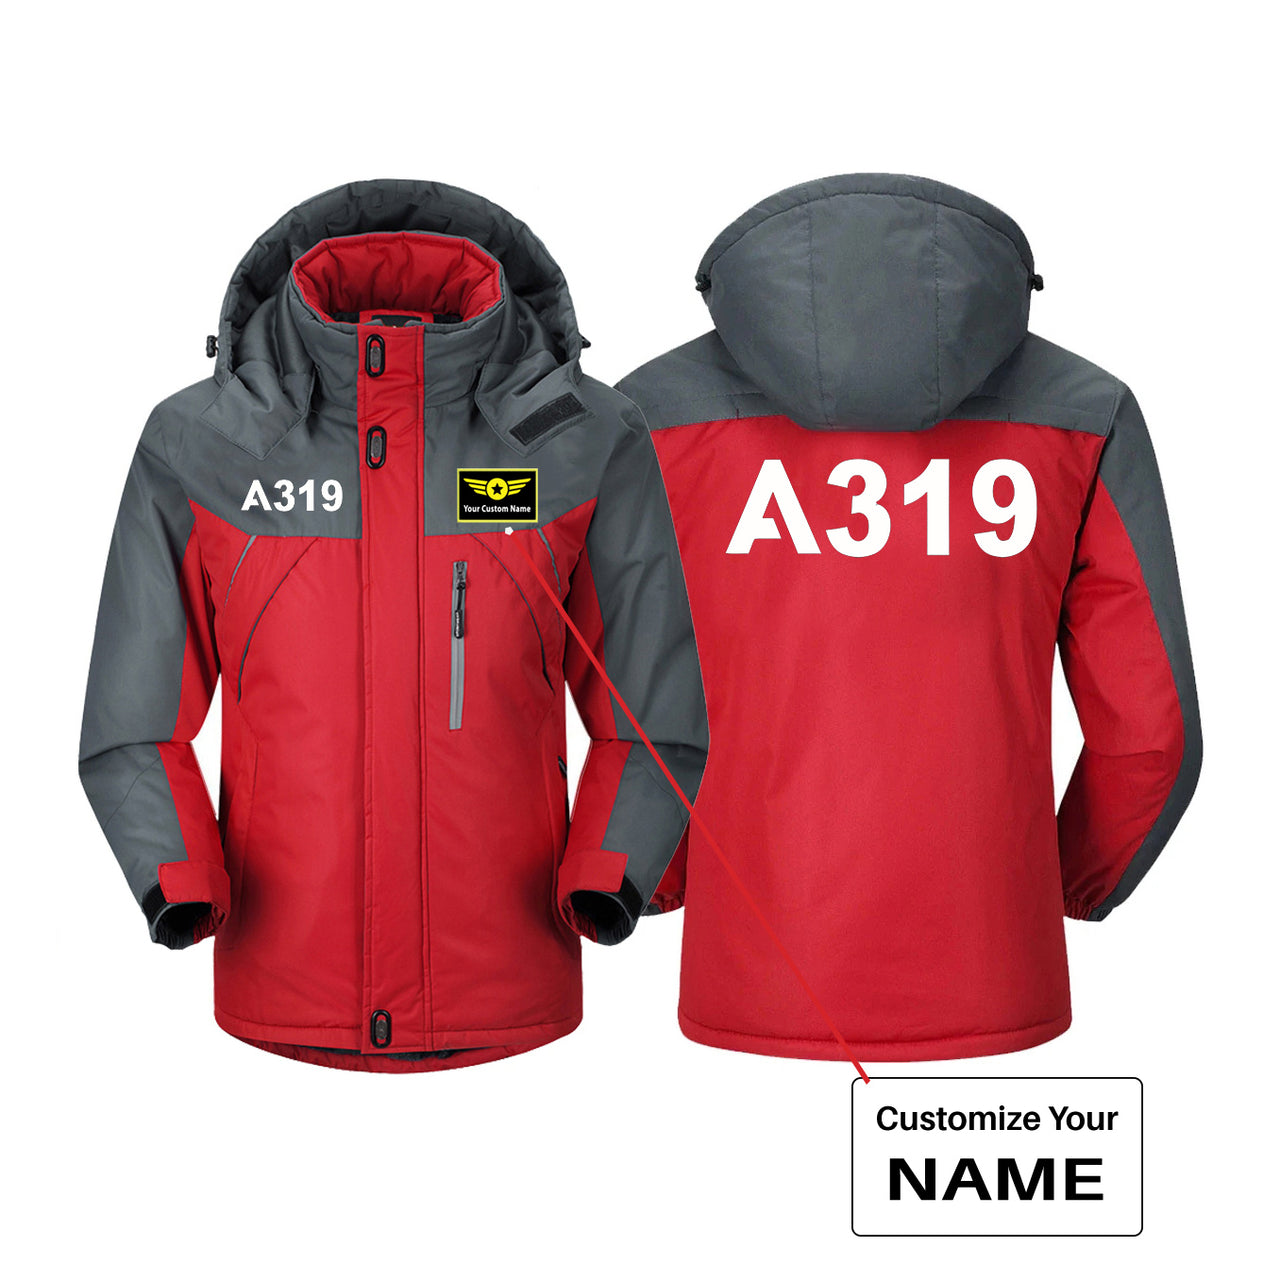 A319 Flat Text Designed Thick Winter Jackets